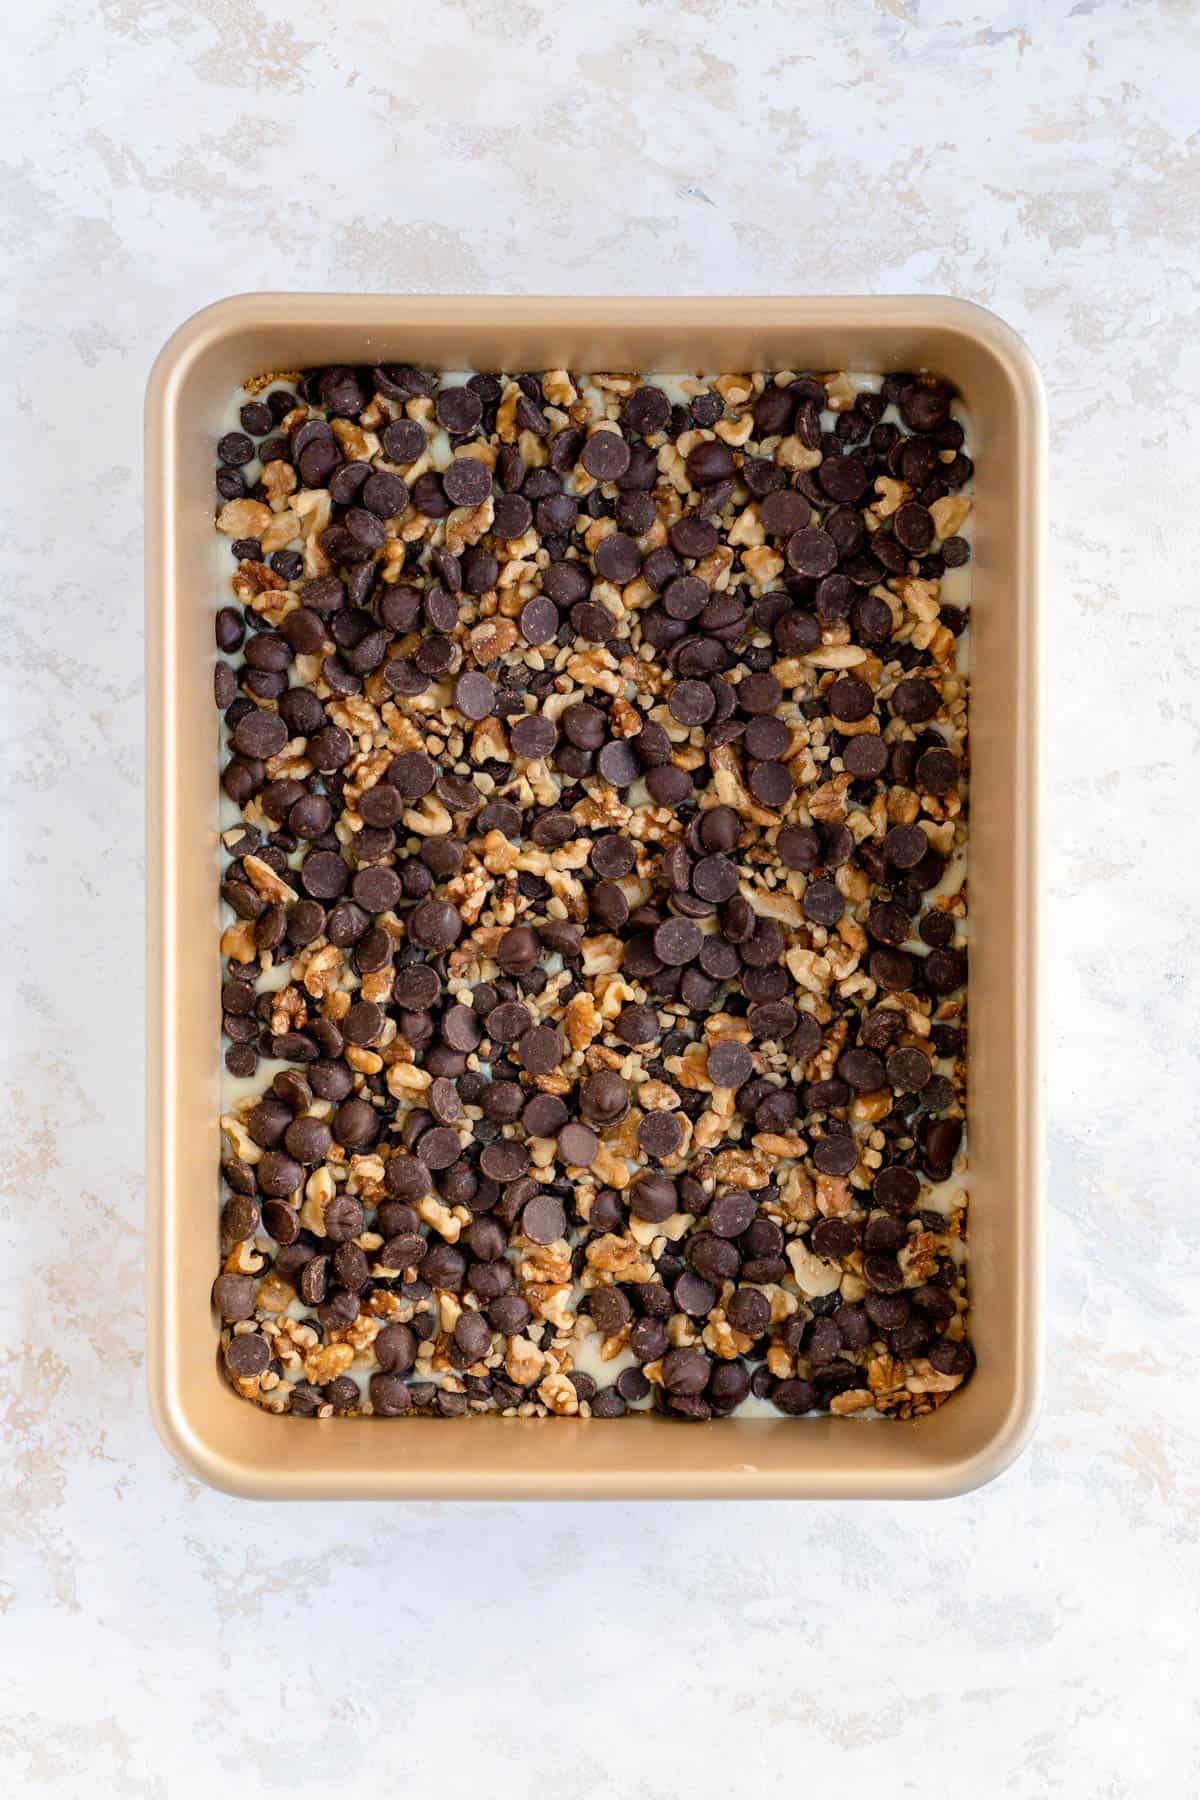 Chocolate chips sprinkled over walnuts and condensed milk in a cold 9 x 13 pan